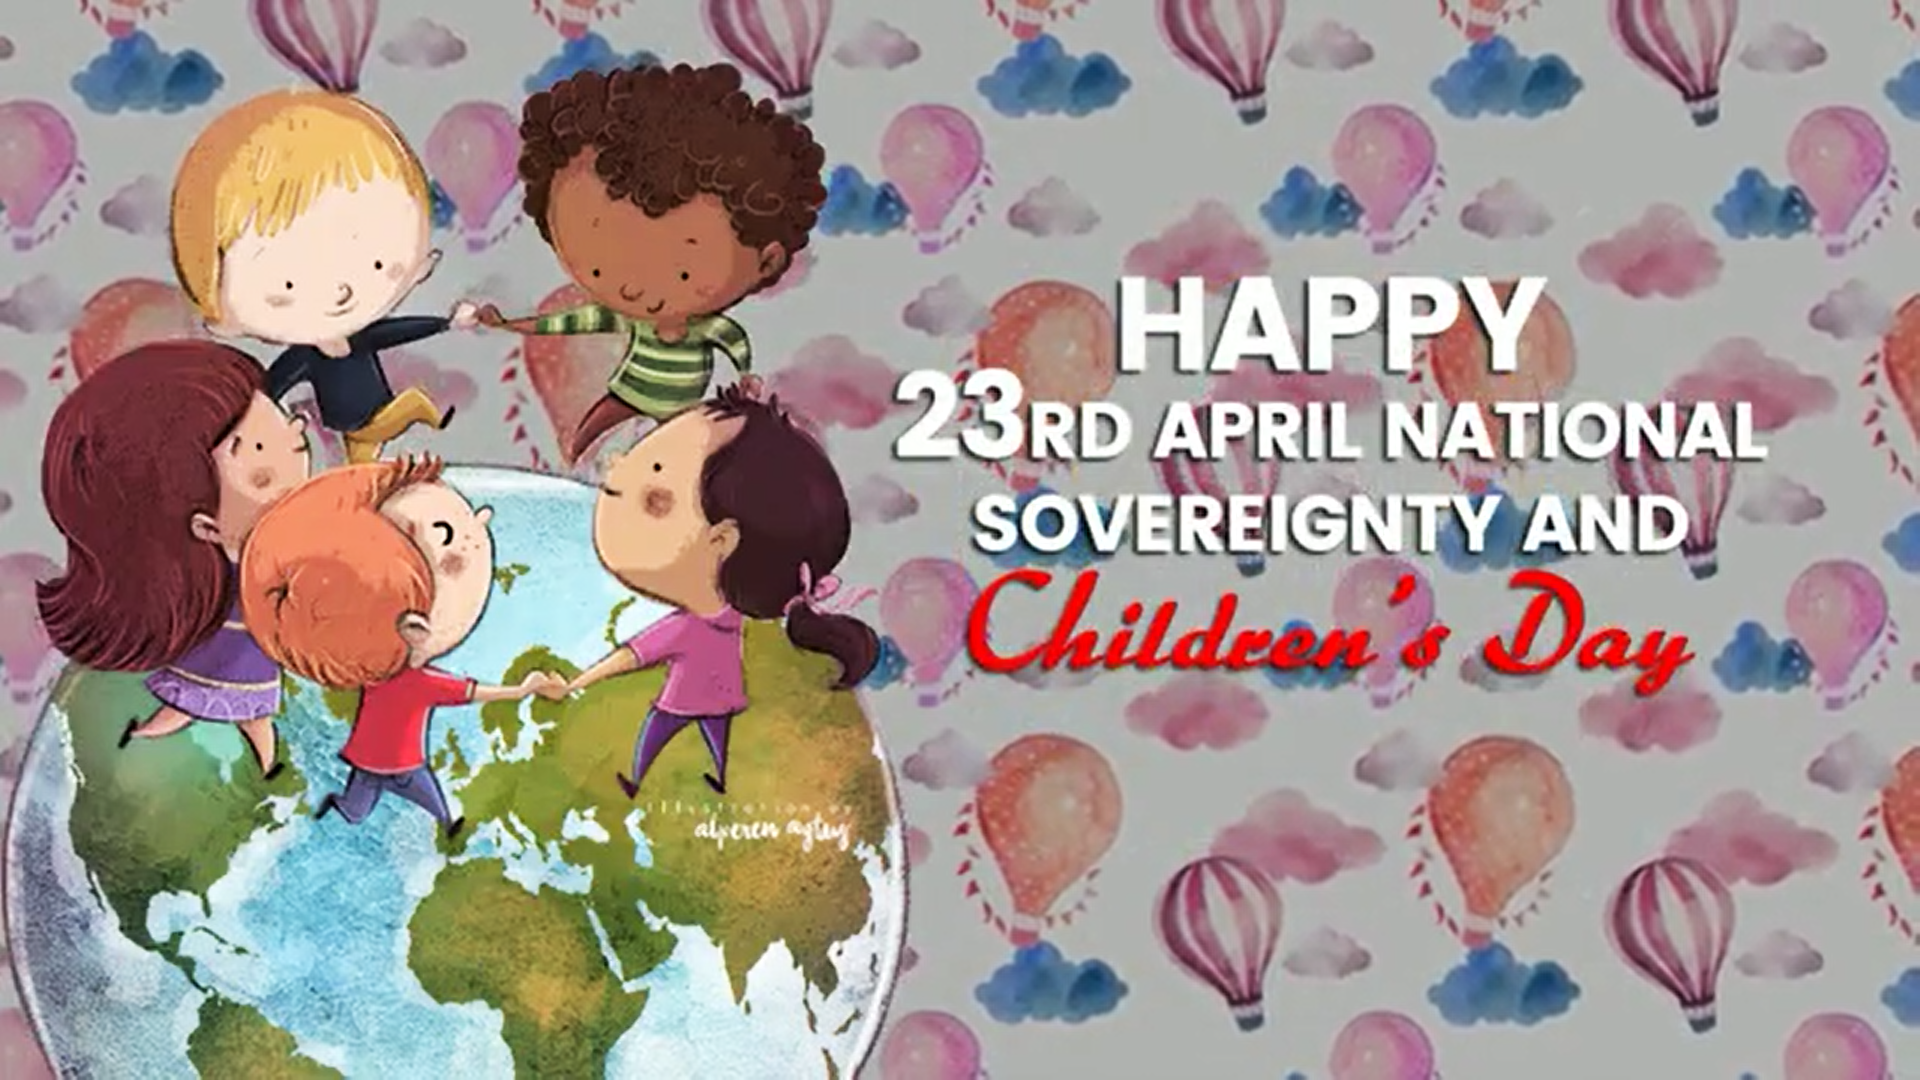 Happy 23rd April National Sovereignty & Children’s Day